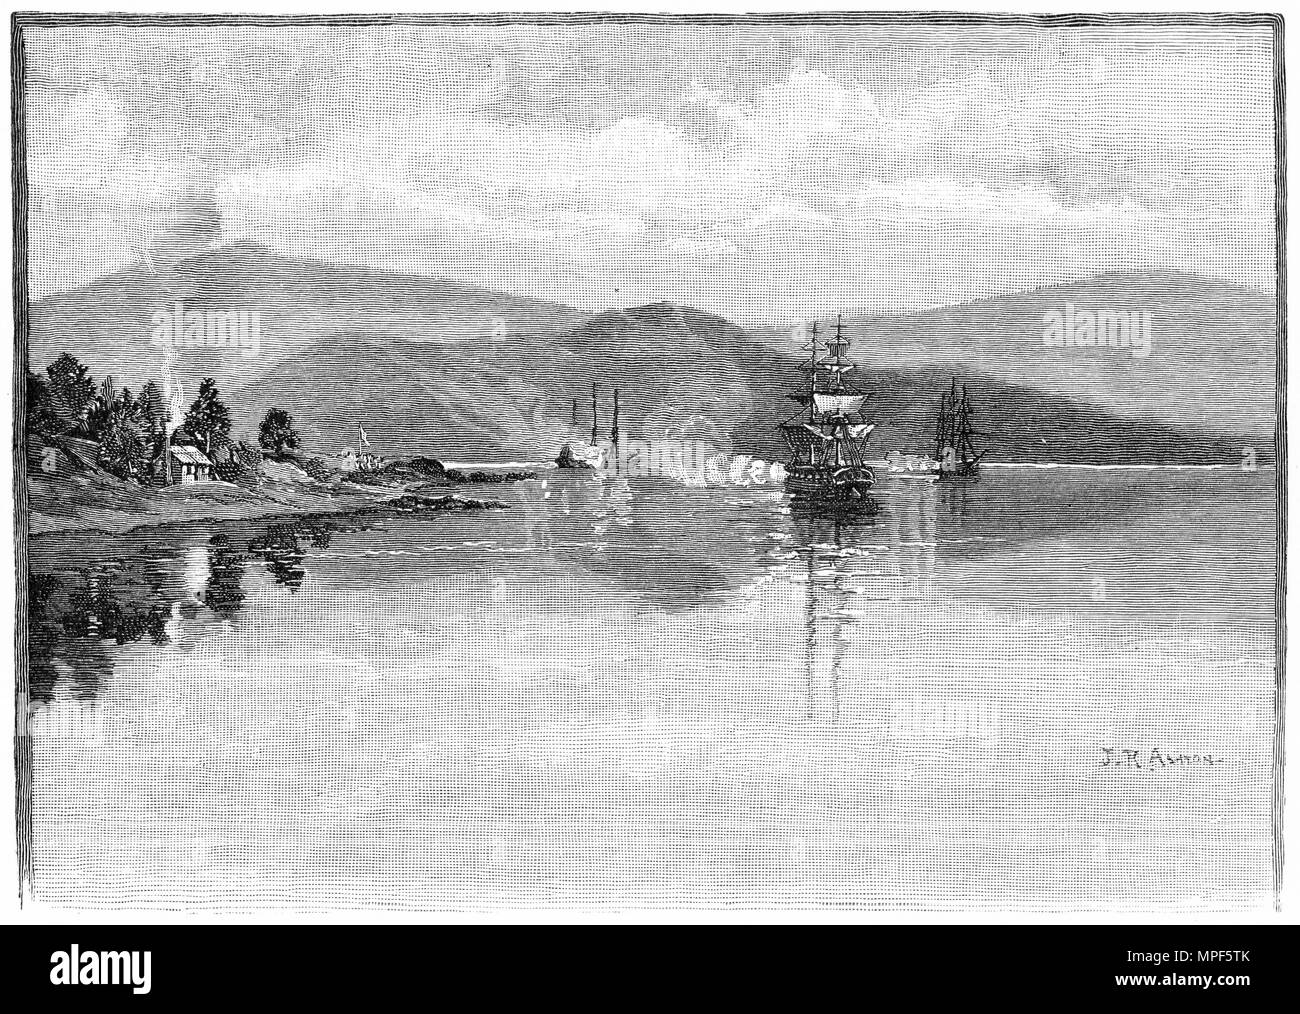 Engraving of colonists raising the British flag at Akaroa, originally a French whaling station, New Zealand. From the Picturesque Atlas of Australasia Vol 3, 1886 Stock Photo